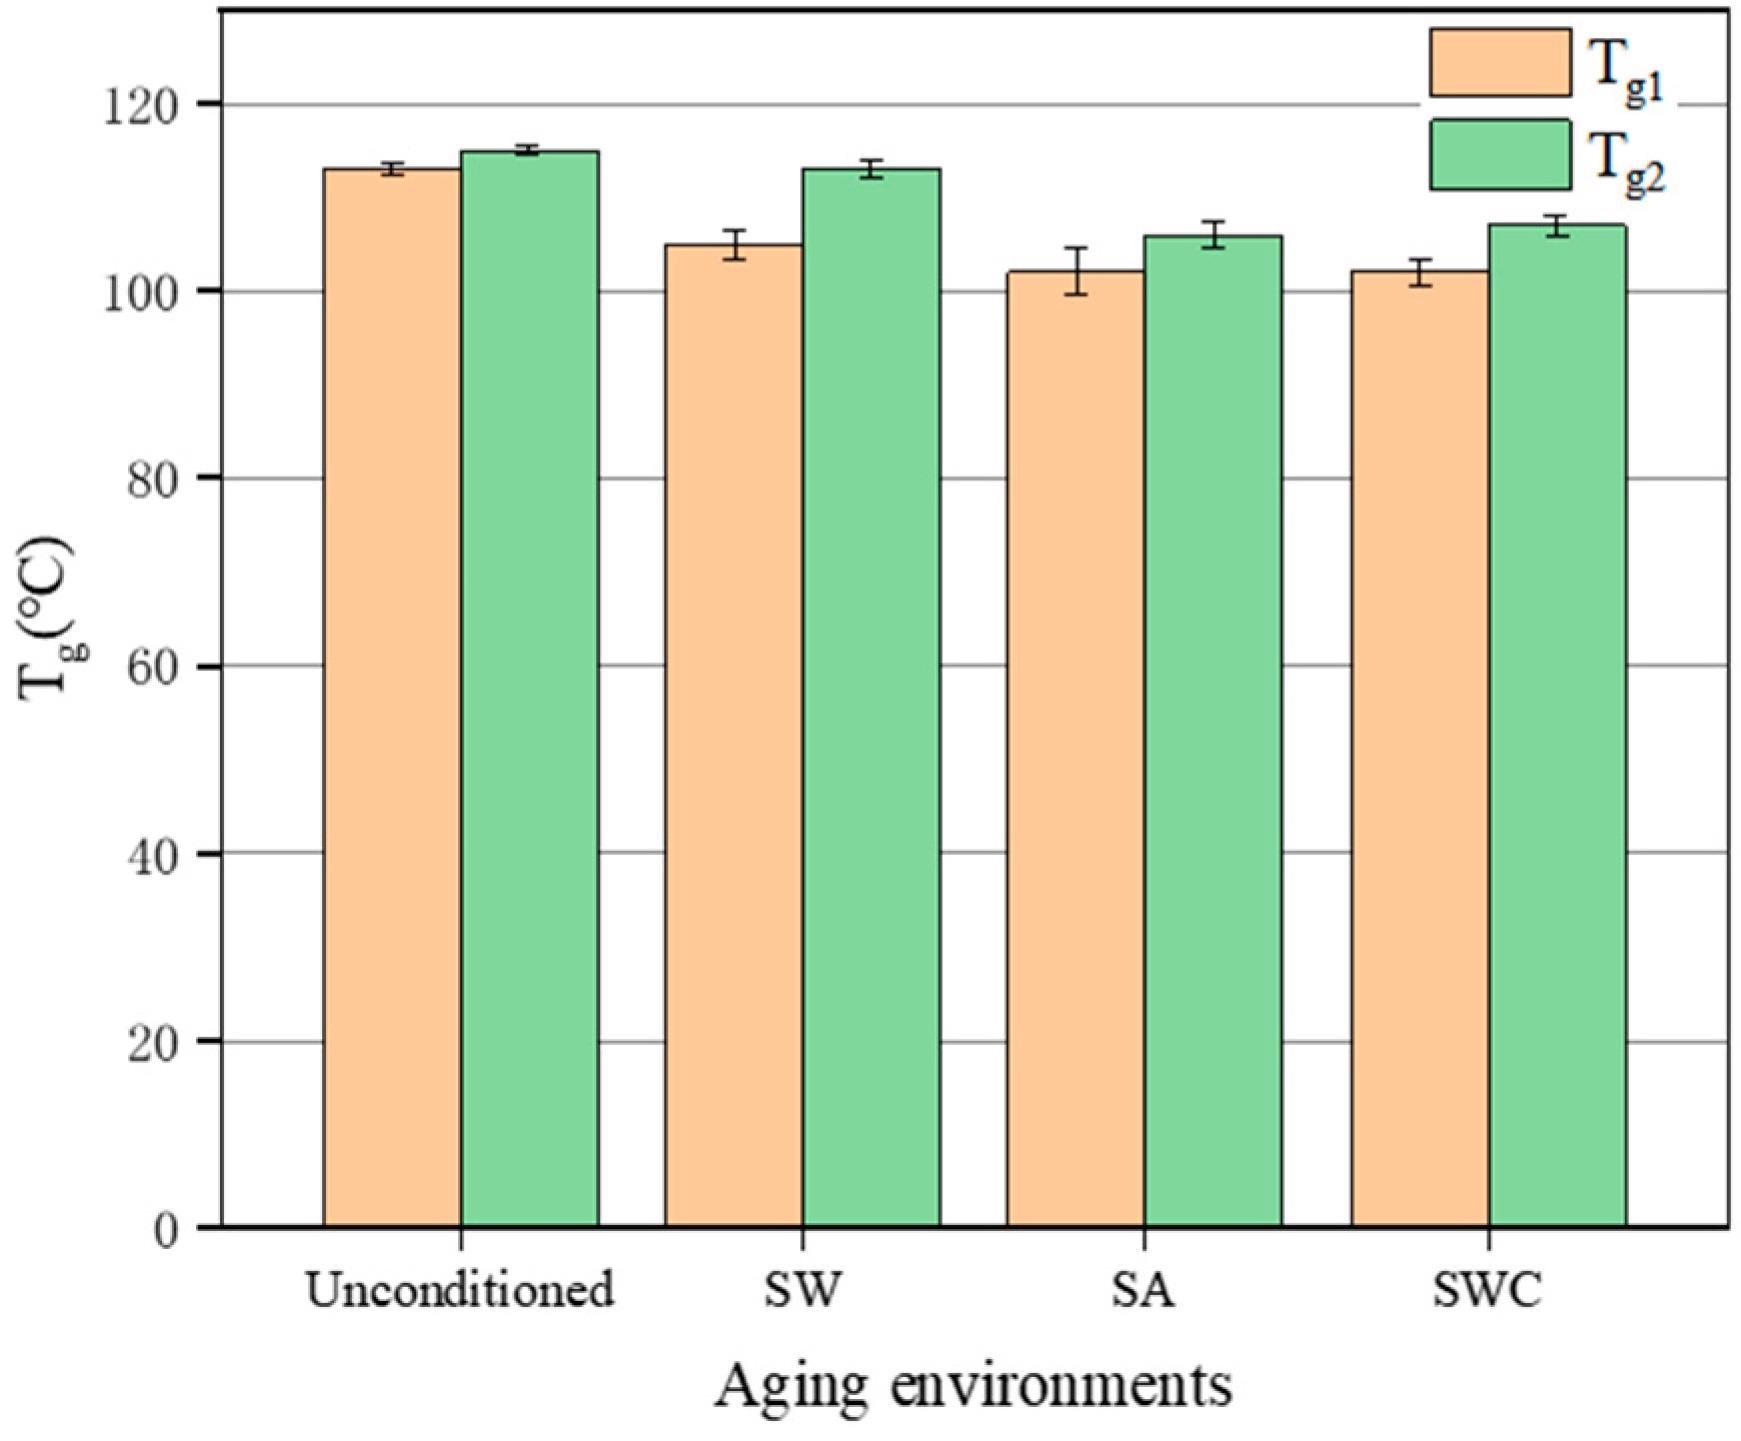 Comparison of Tg of GFRP bars in different aging environments.